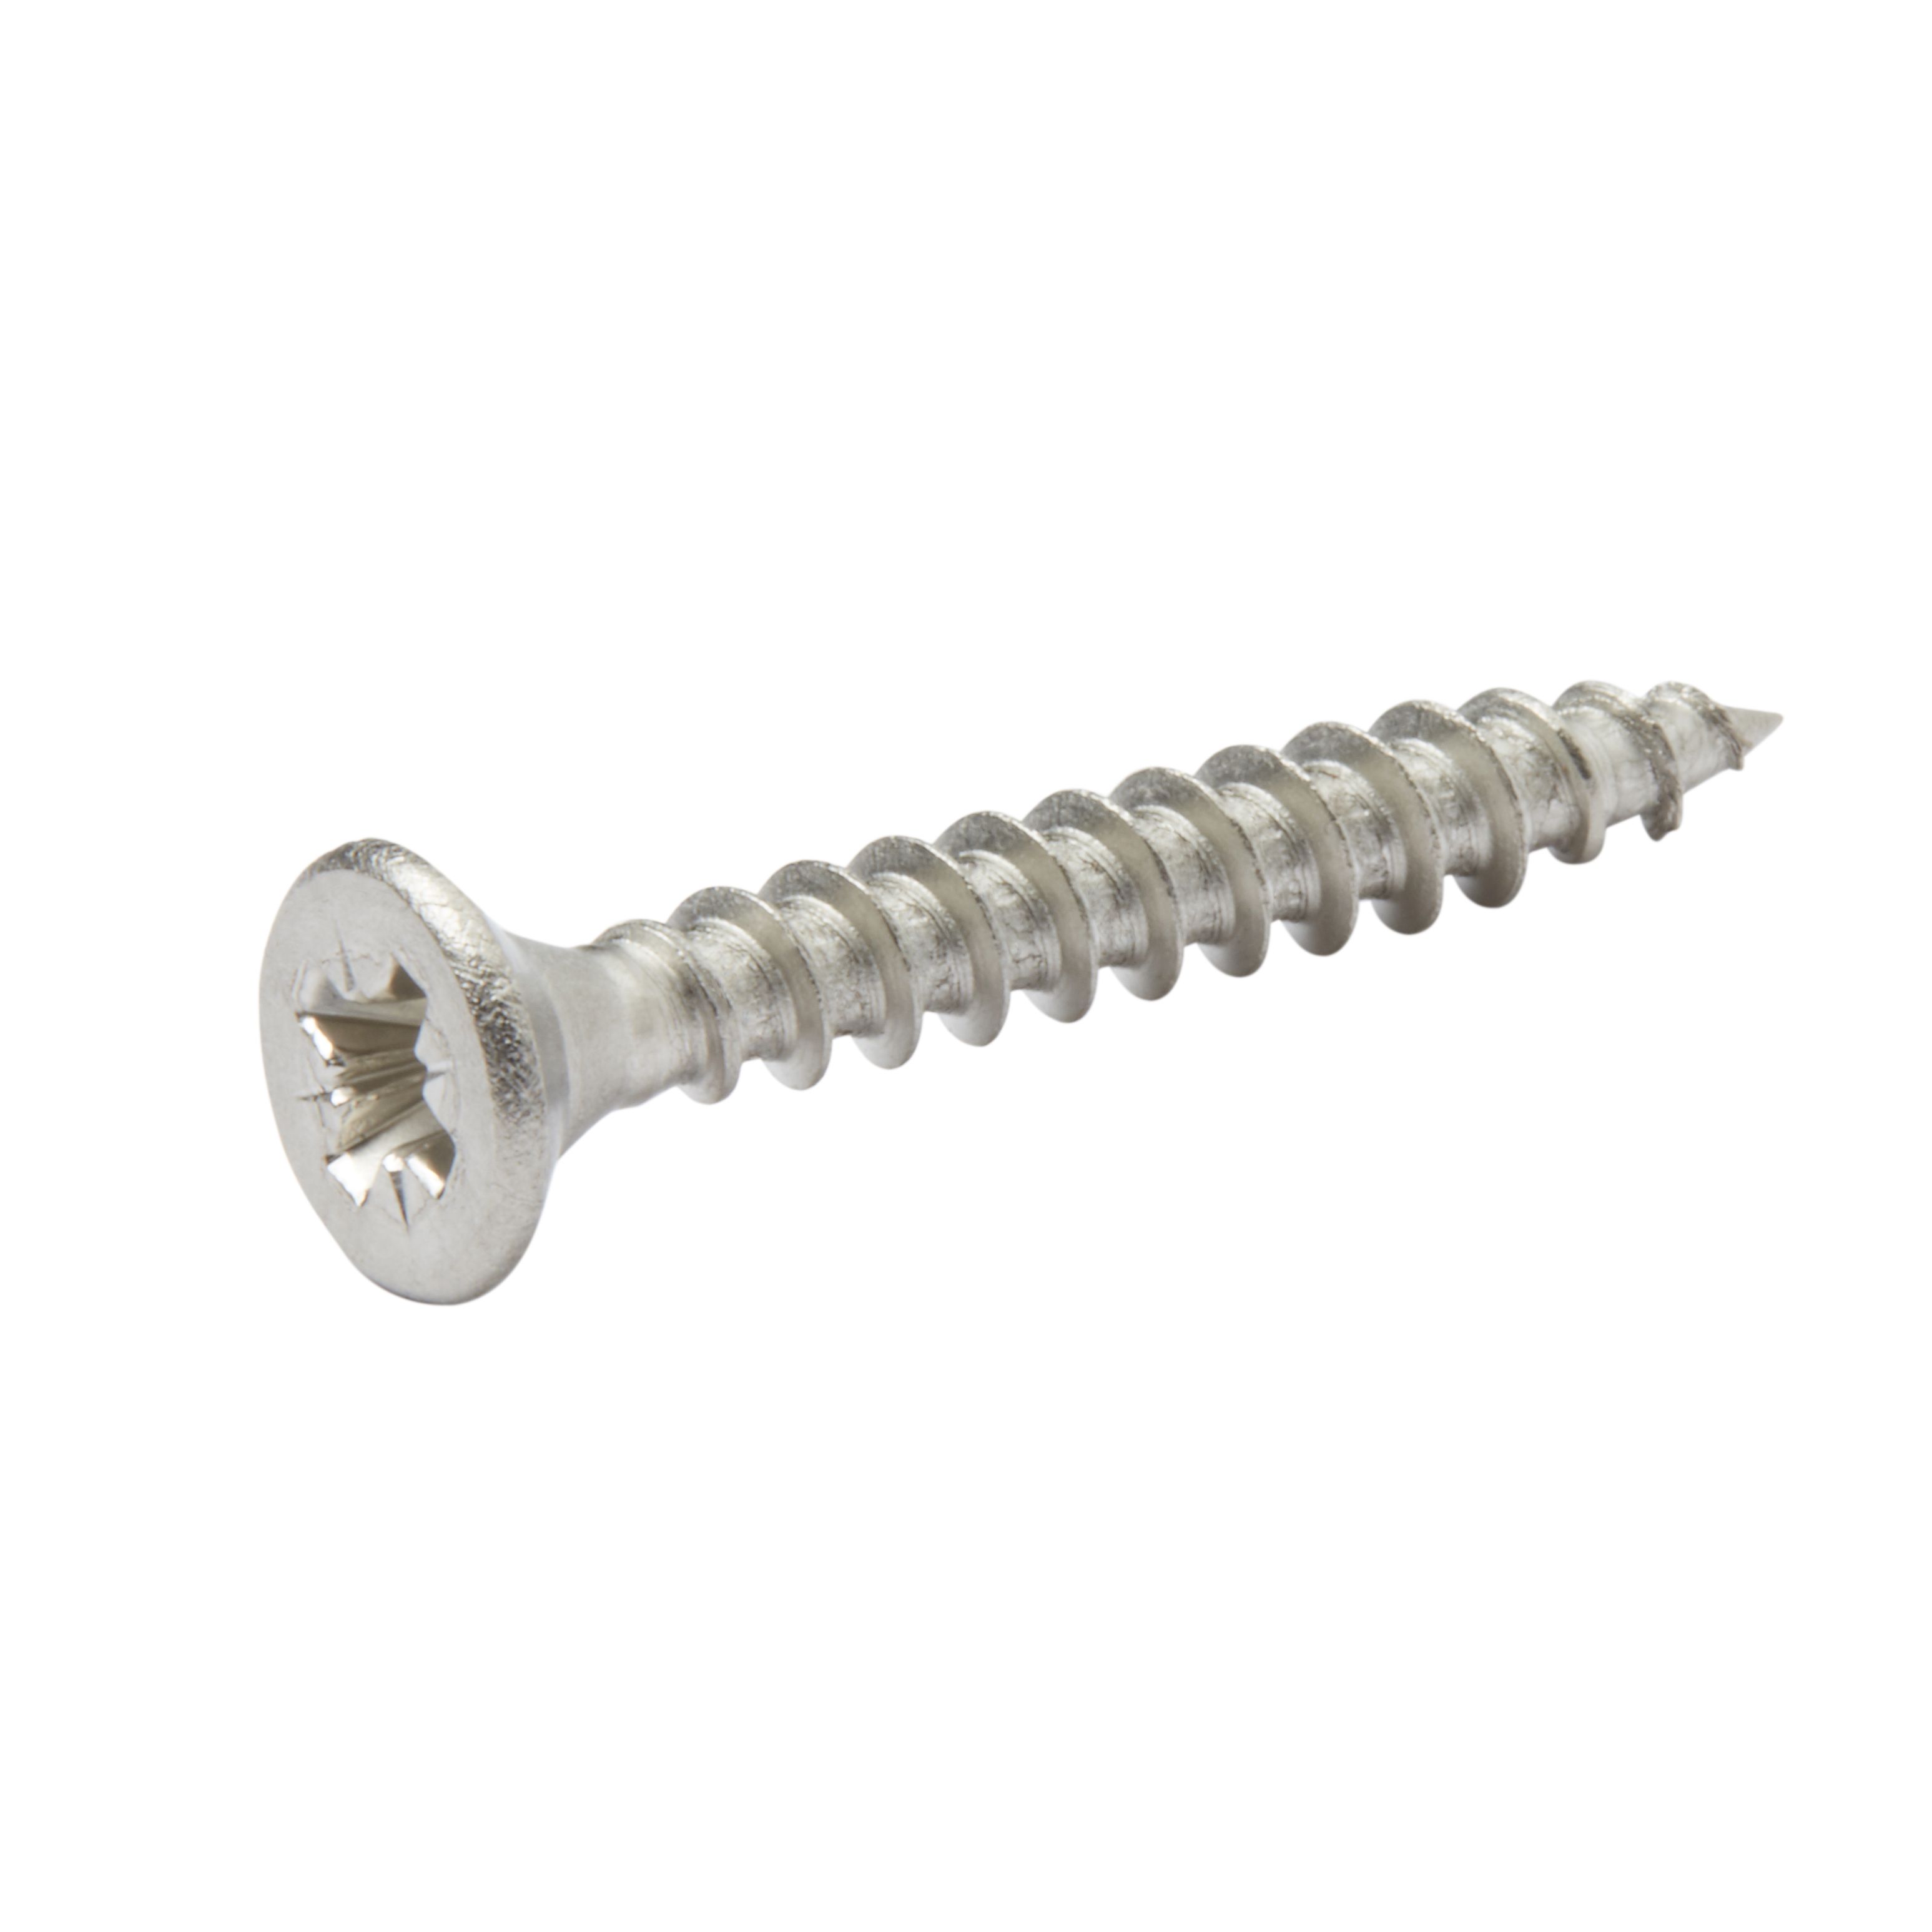 Diall Pozidriv Stainless steel Screw (Dia)4mm (L)30mm, Pack of 20